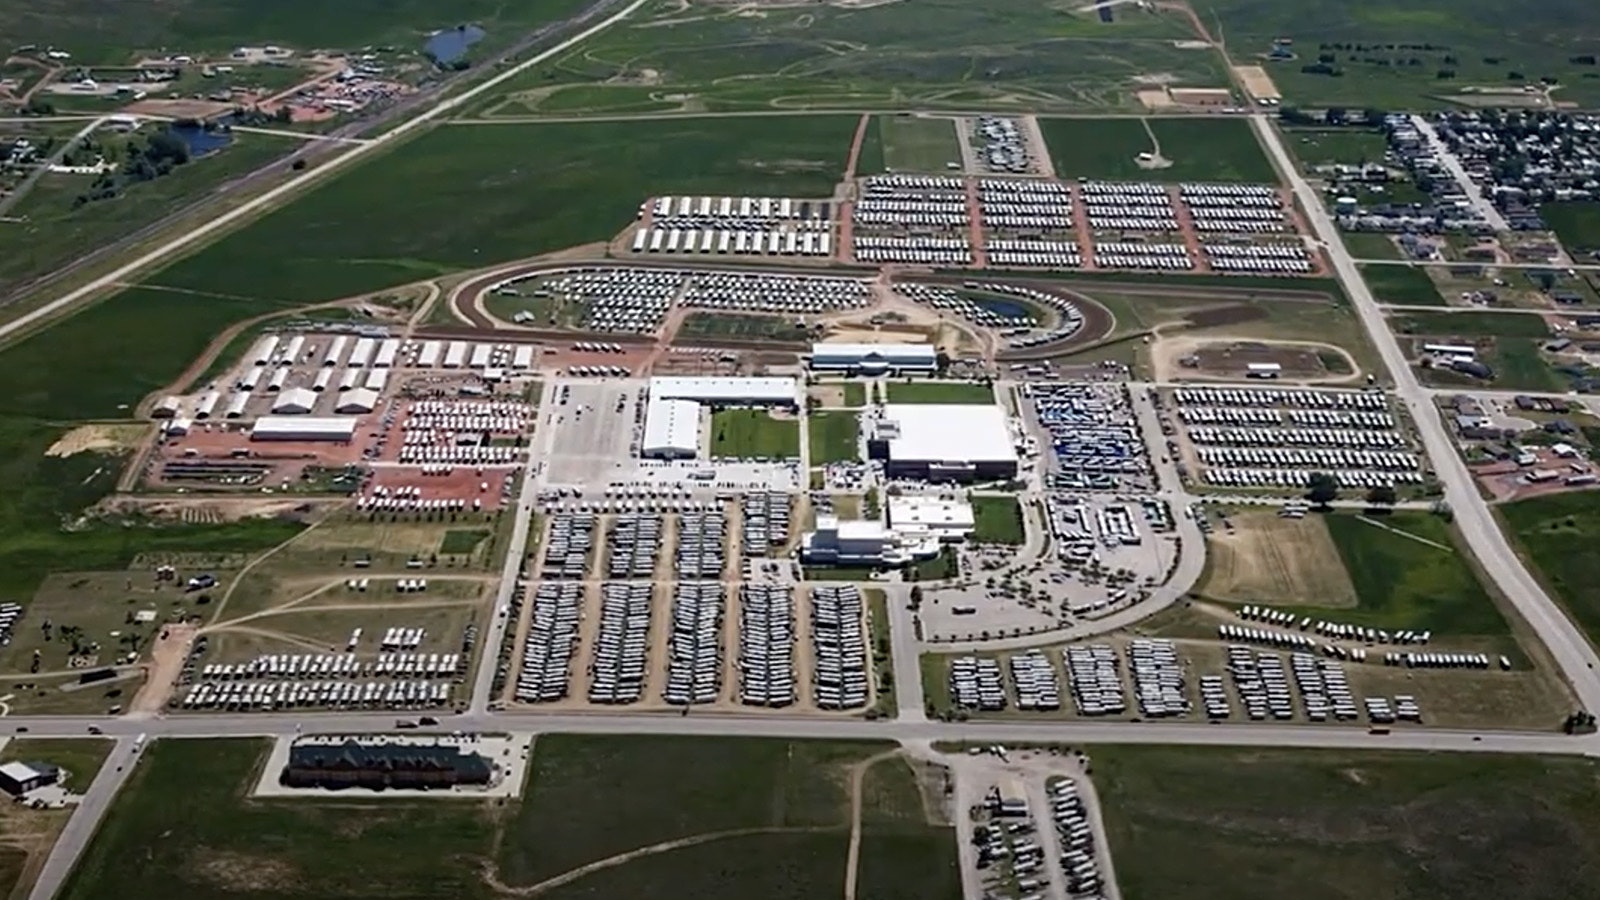 The sprawling Cam-plex campus in Gillette, Wyoming, will host more than 60,000 International Pathfinder Camporees and support people this summer on its grounds, which encompasses more than 1,000 acres.